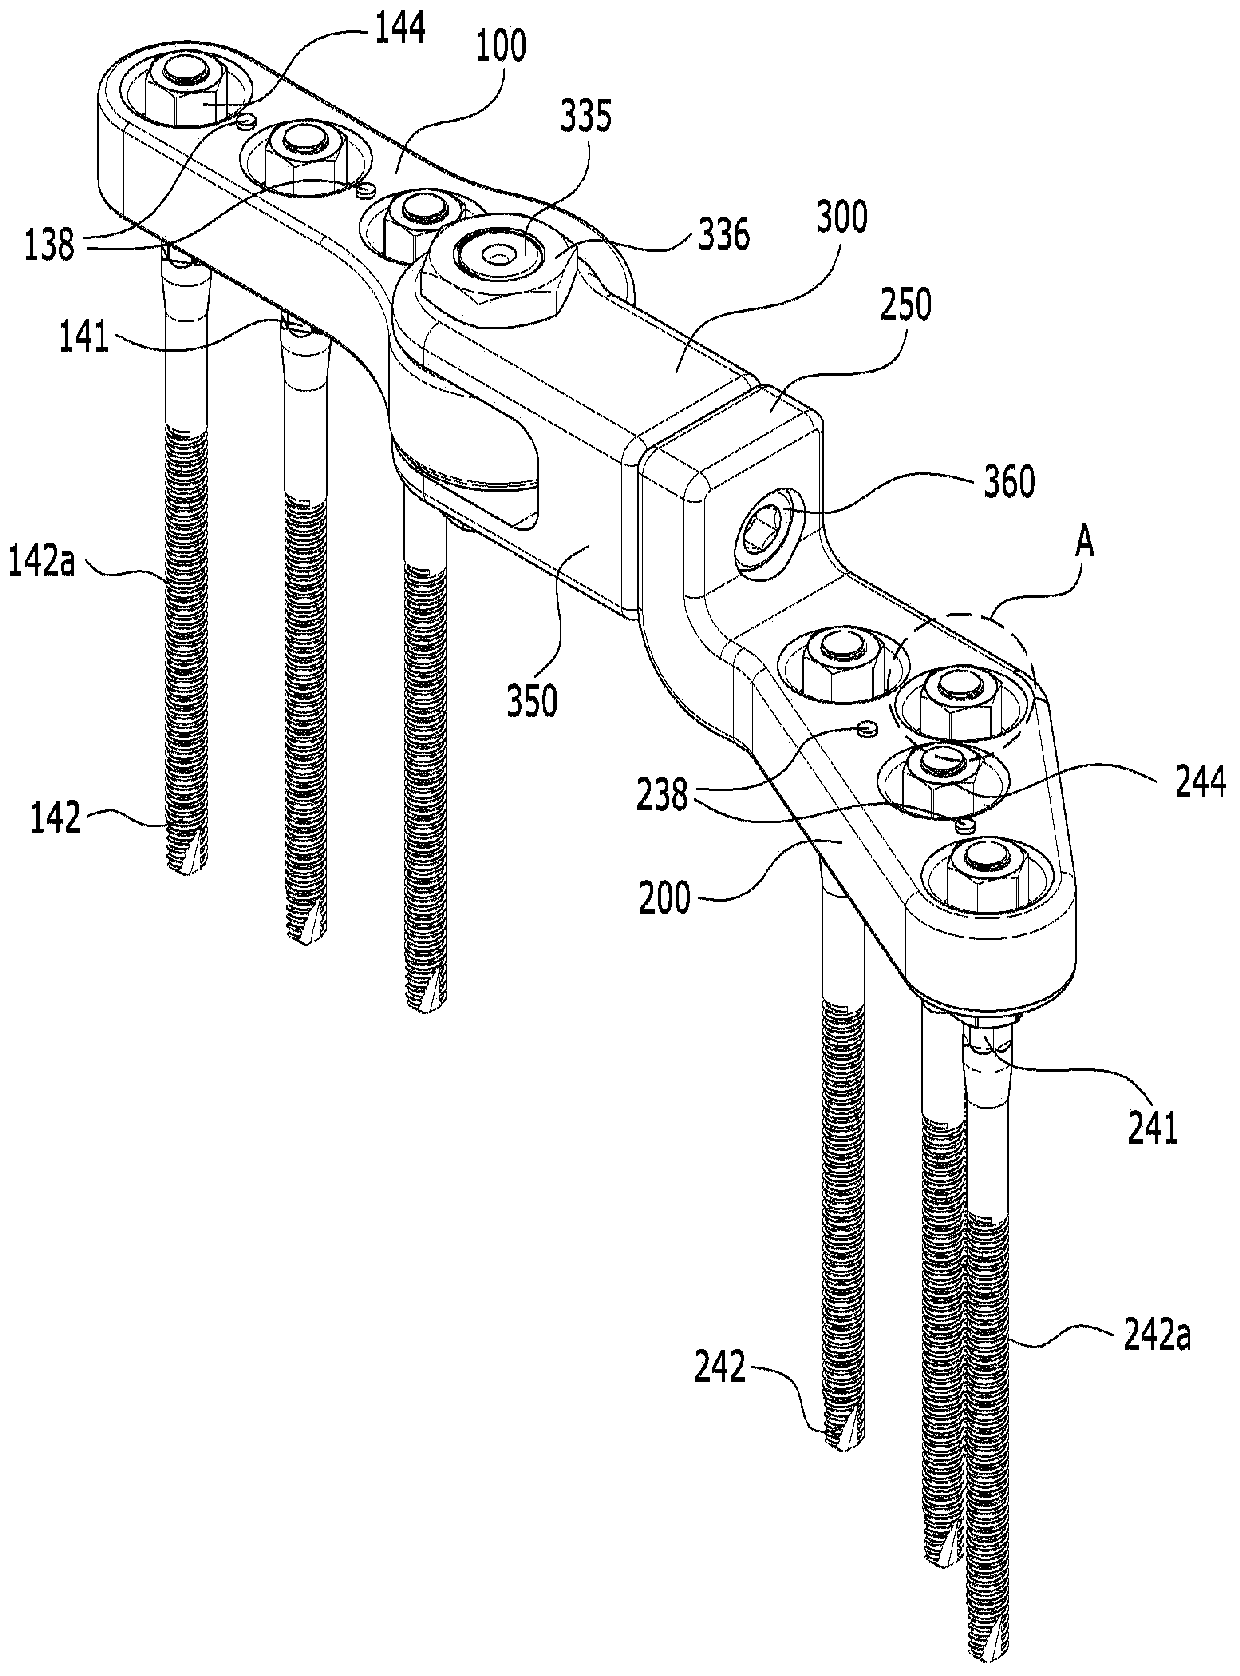 Knee assistive device capable of three-dimensional movement